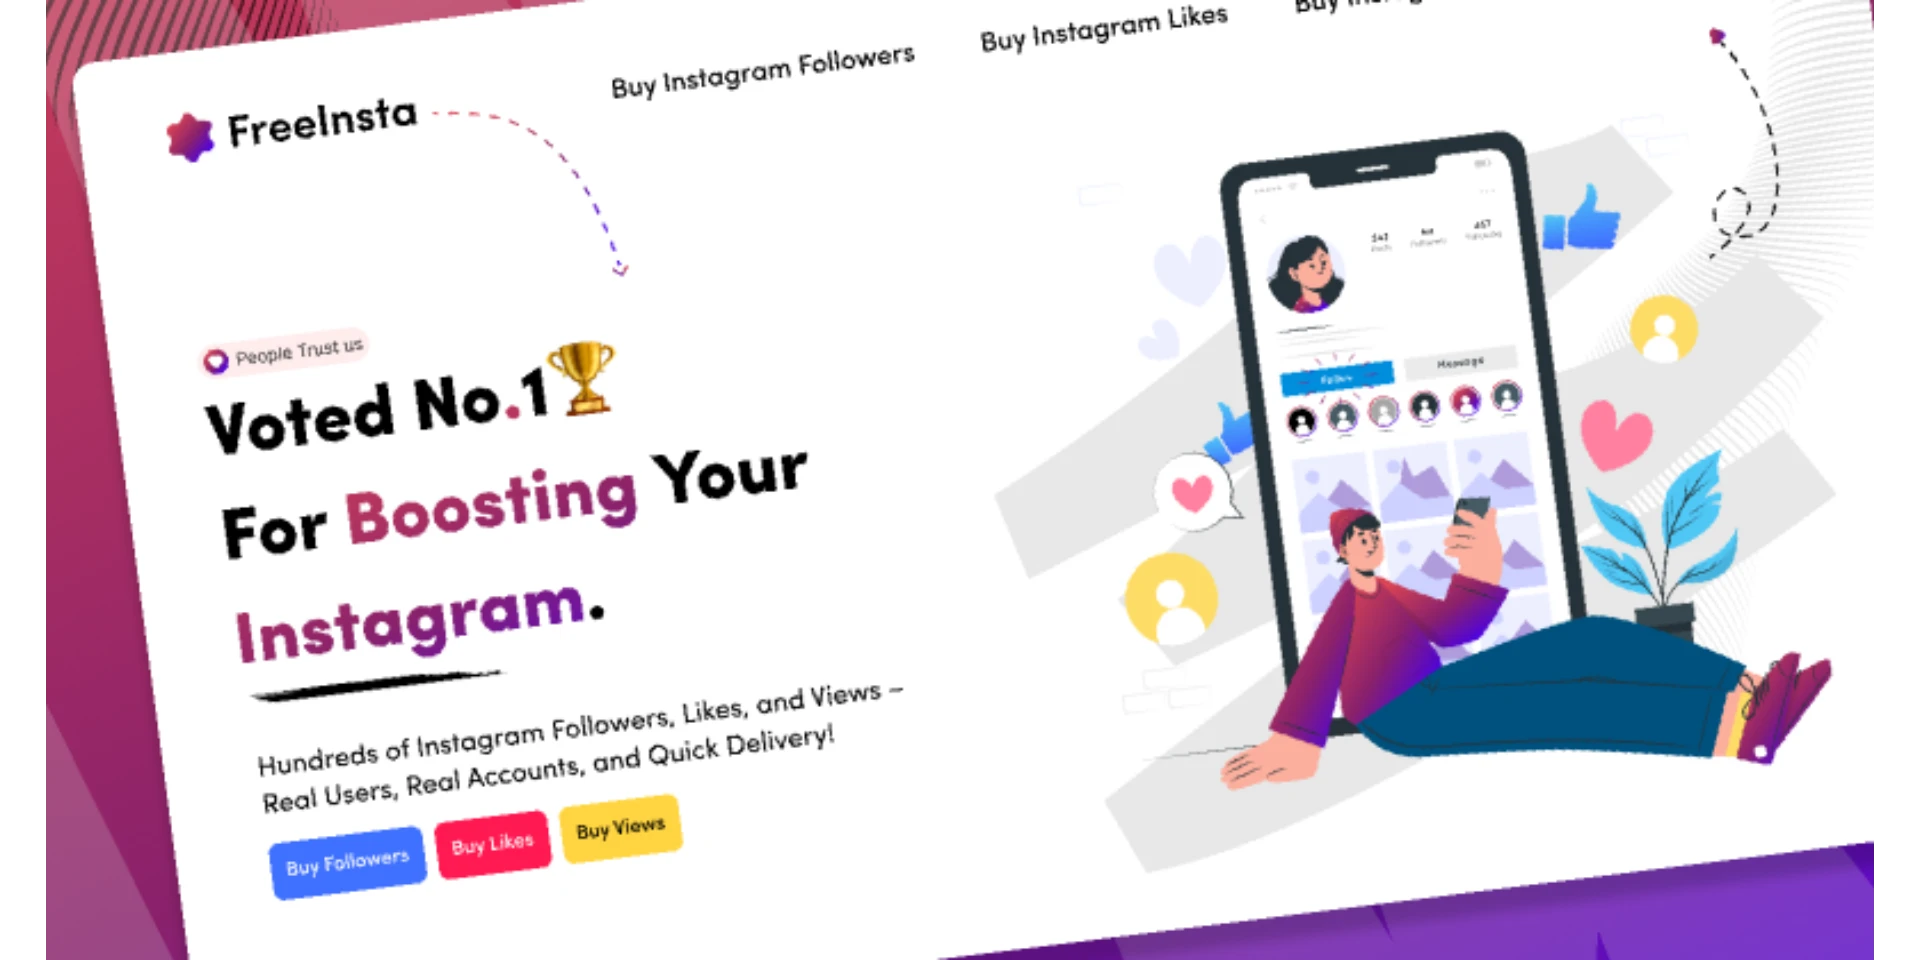 FreeInsta - Instagram Boosting Creative Landing Page Template for Figma and Adobe XD